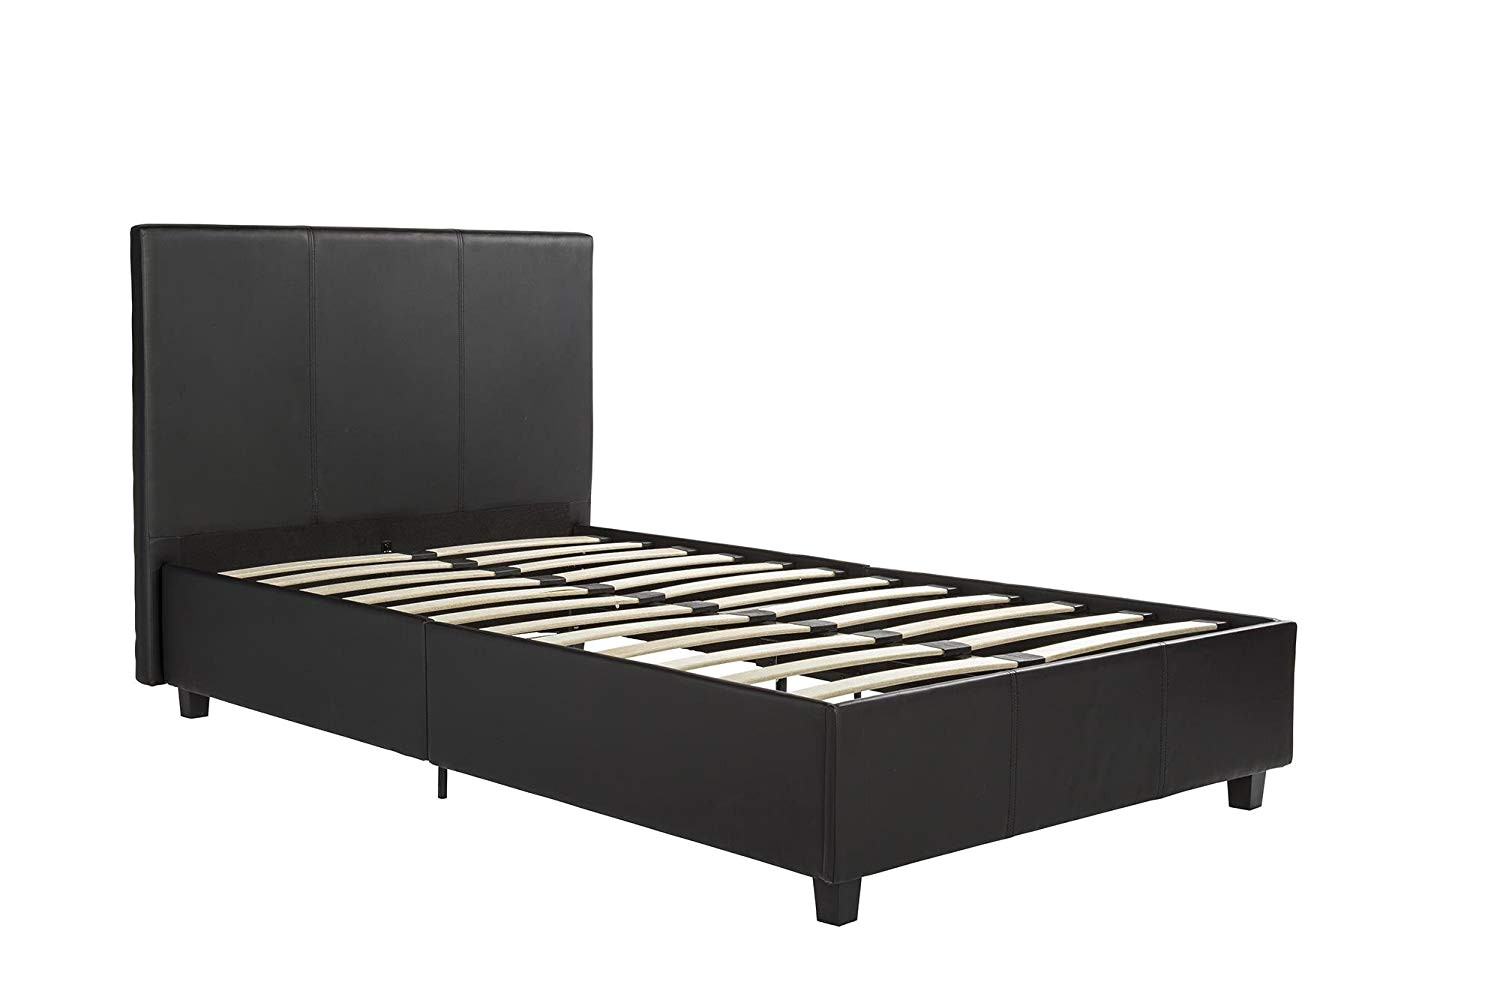 amazon com dhp maddie upholstered platform bed frame black faux leather twin kitchen dining